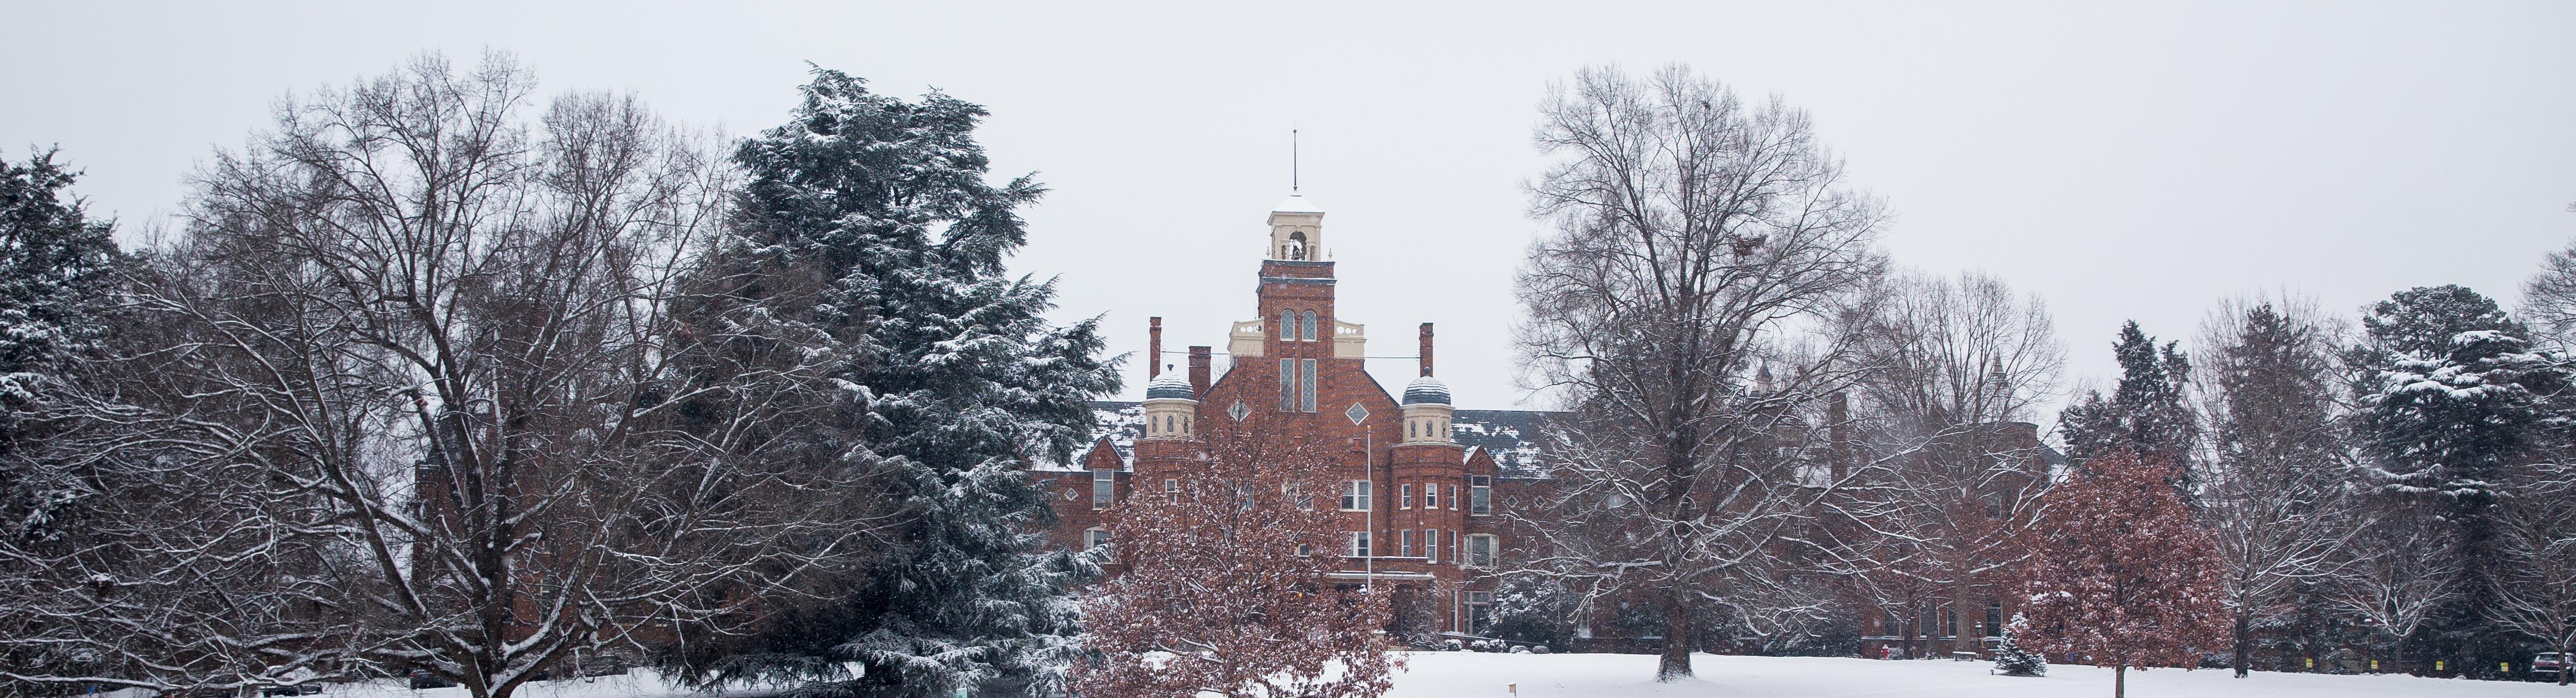 Photo of Main Hall in the snow